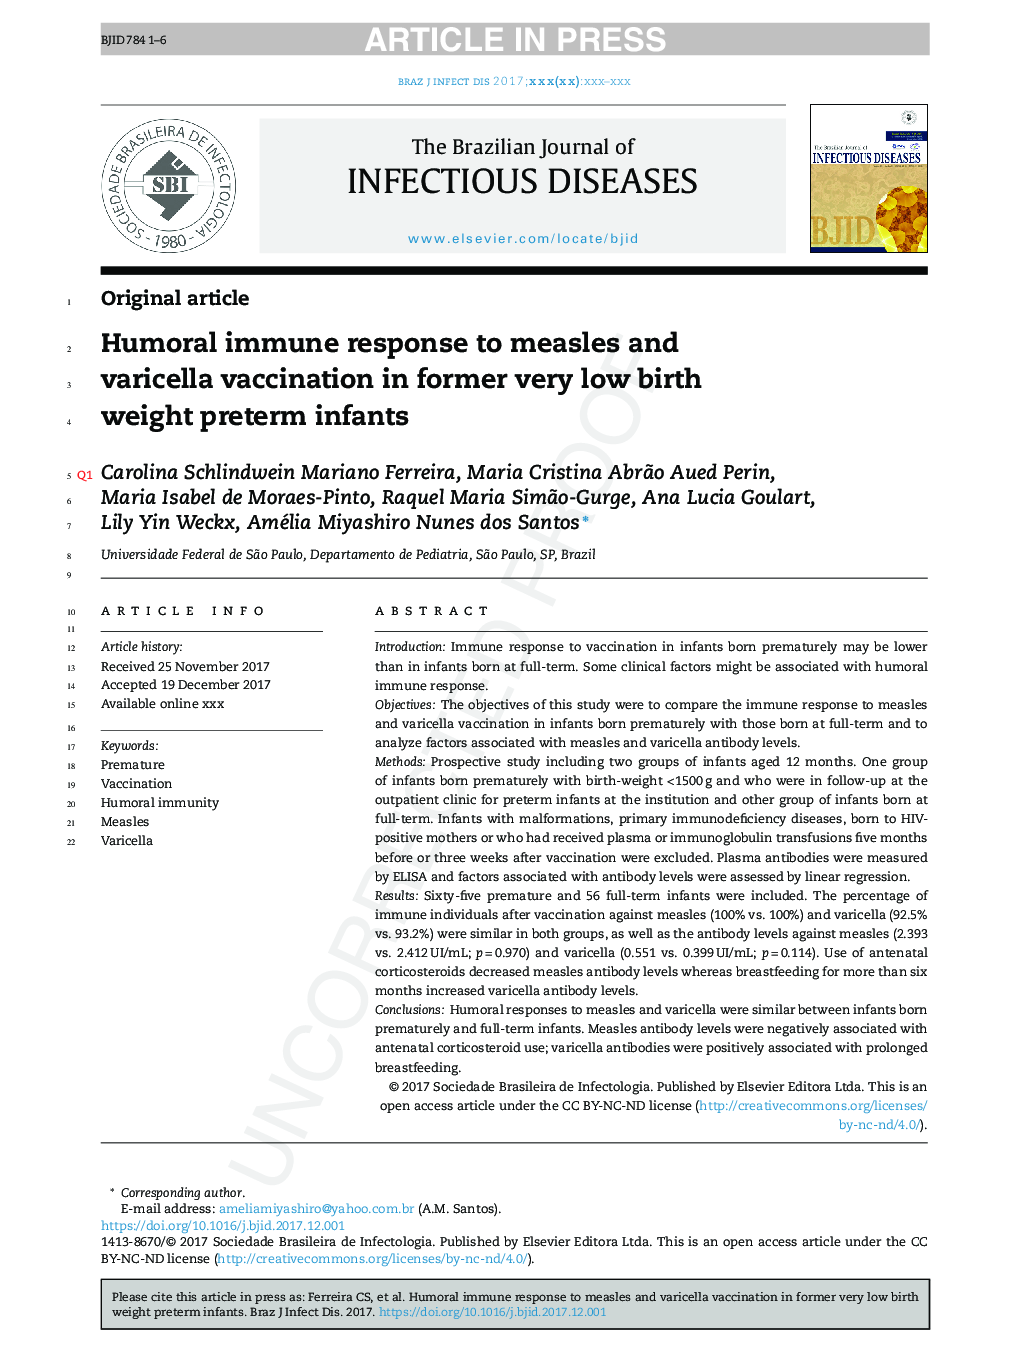 Humoral immune response to measles and varicella vaccination in former very low birth weight preterm infants